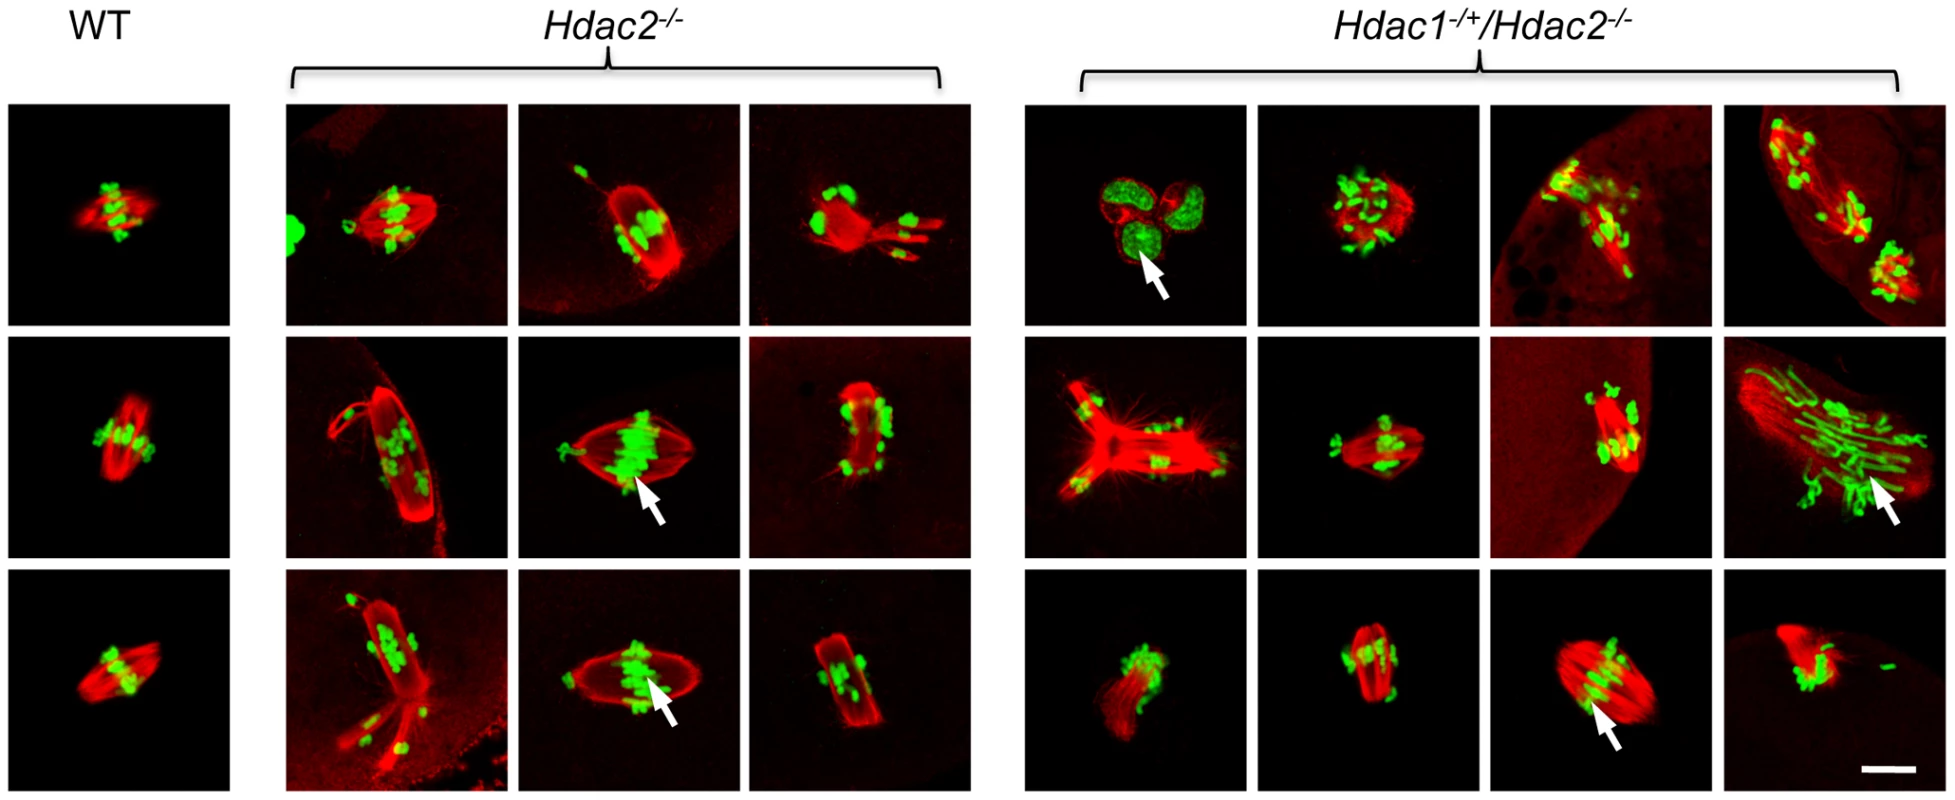 Loss of maternal HDAC2 causes defective chromosome condensation and congression in MII eggs.